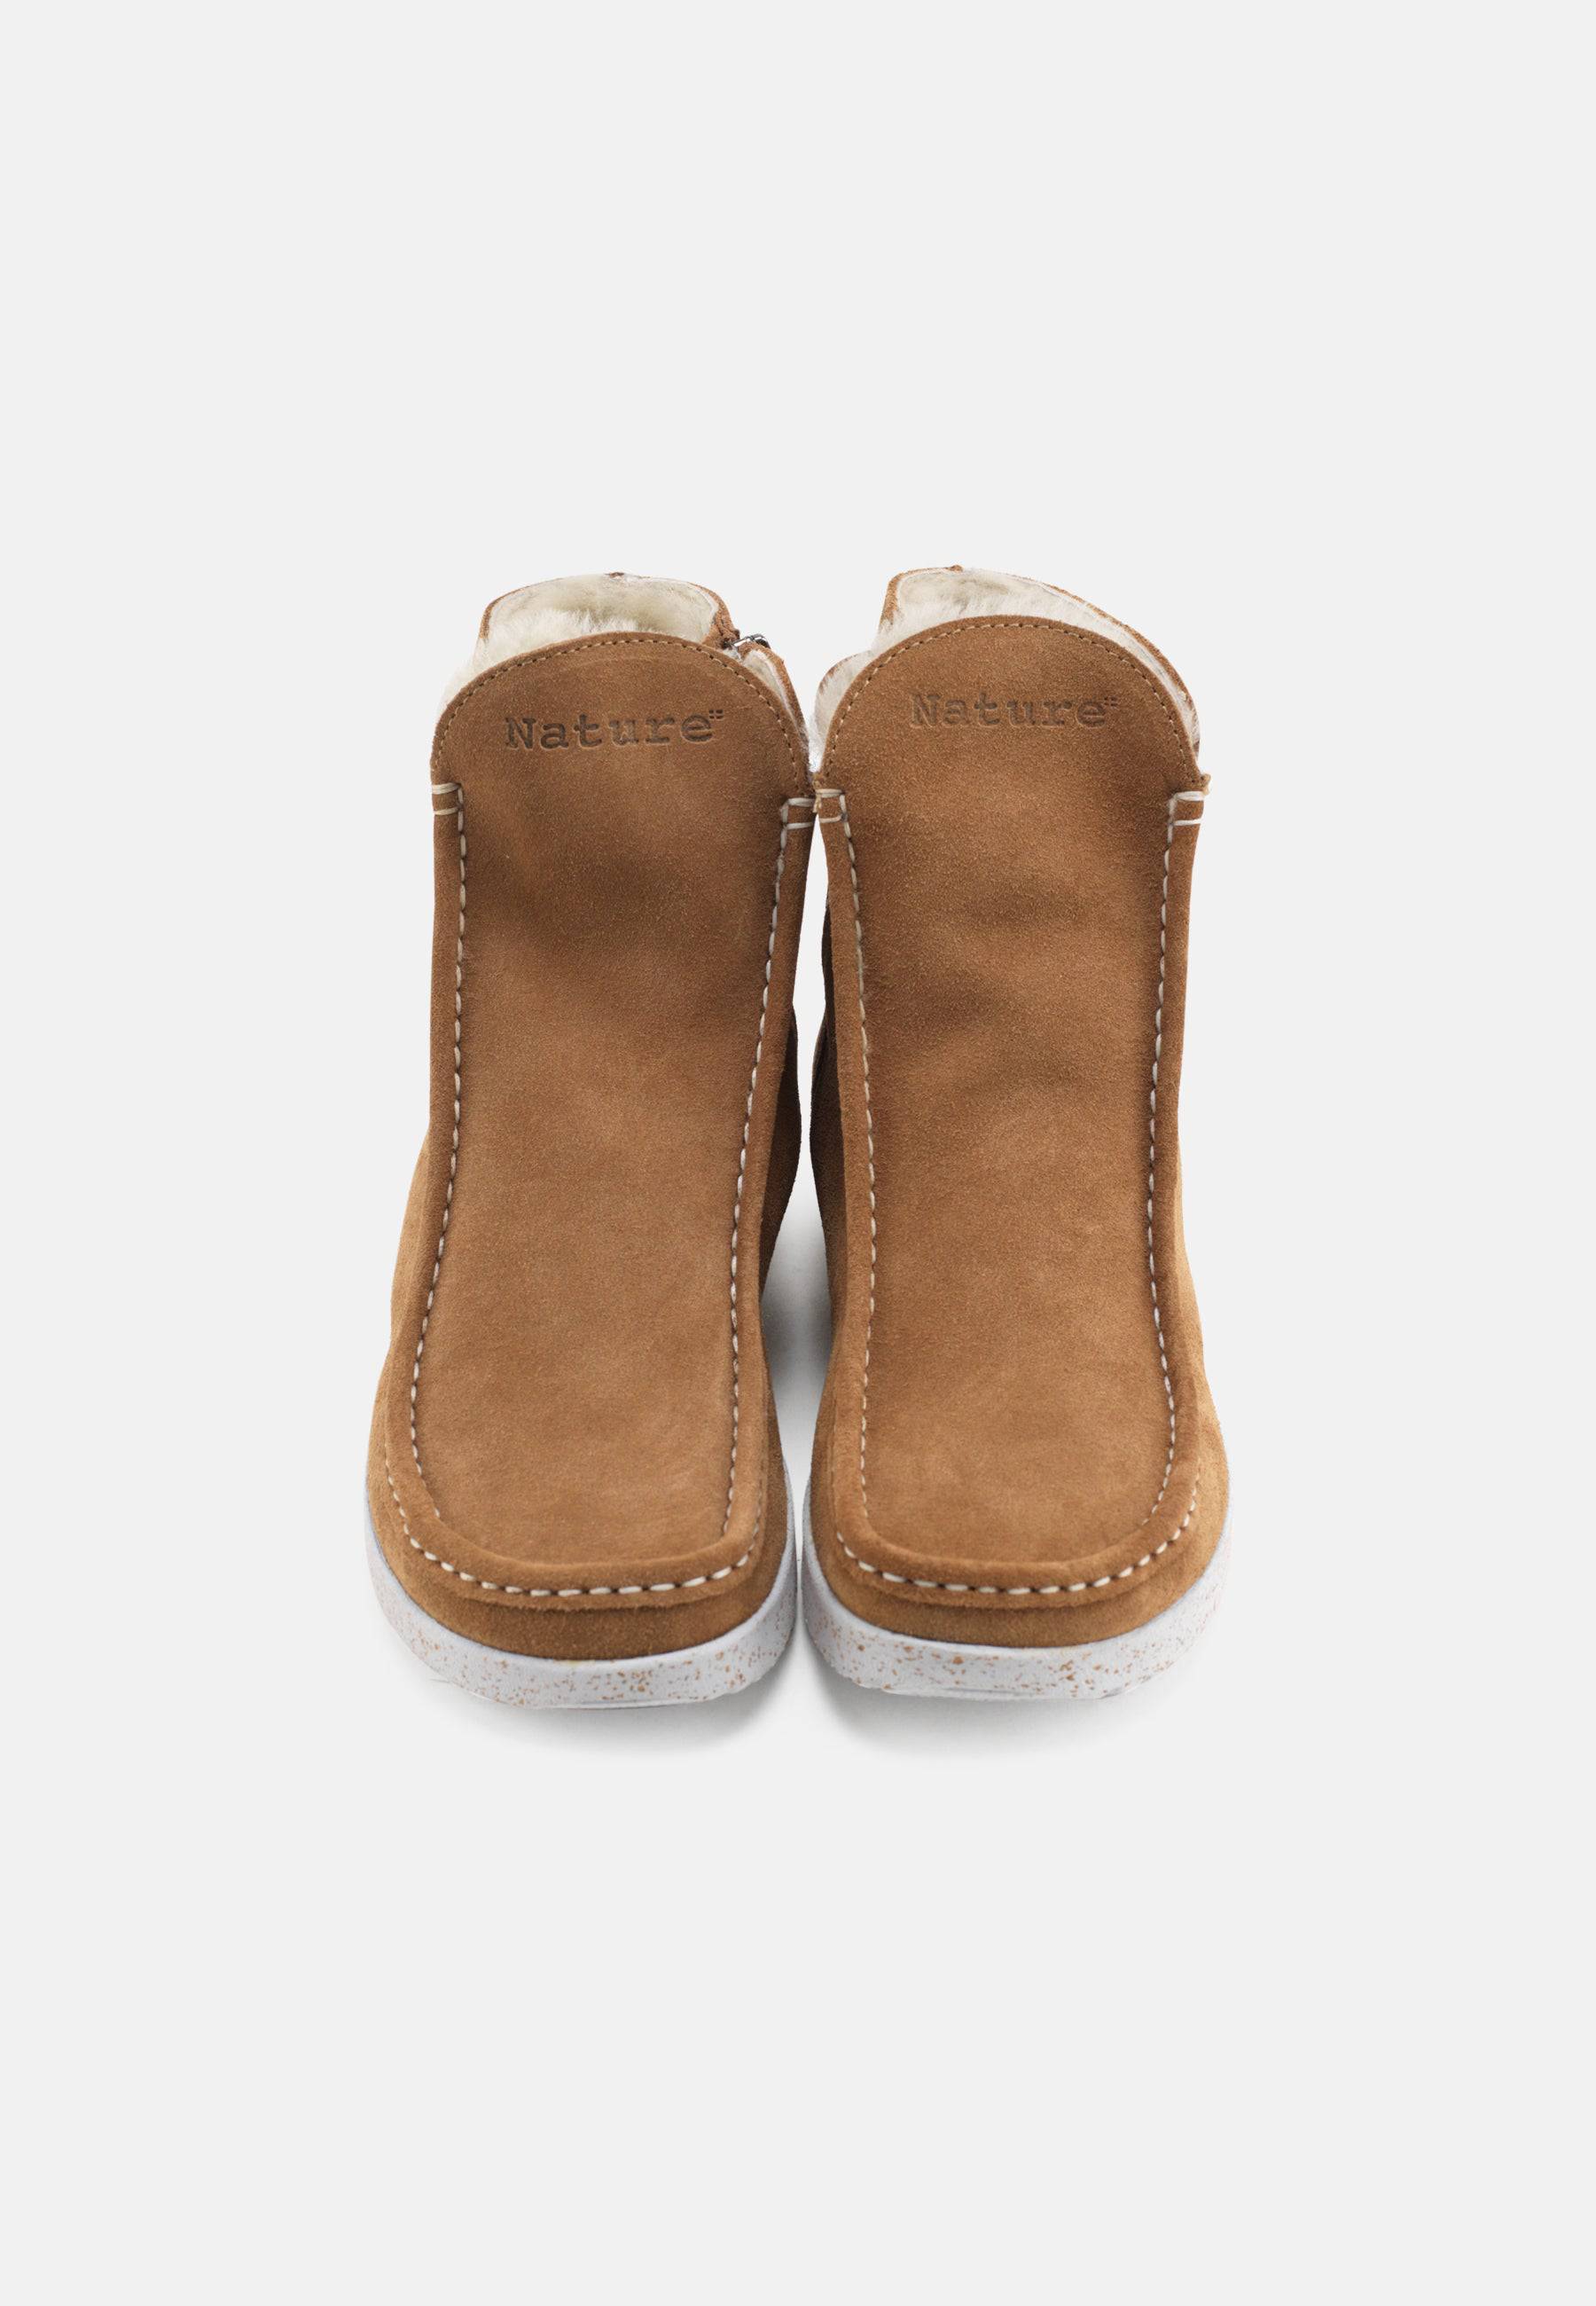 Nanna Warm lined boot Suede - Toffee